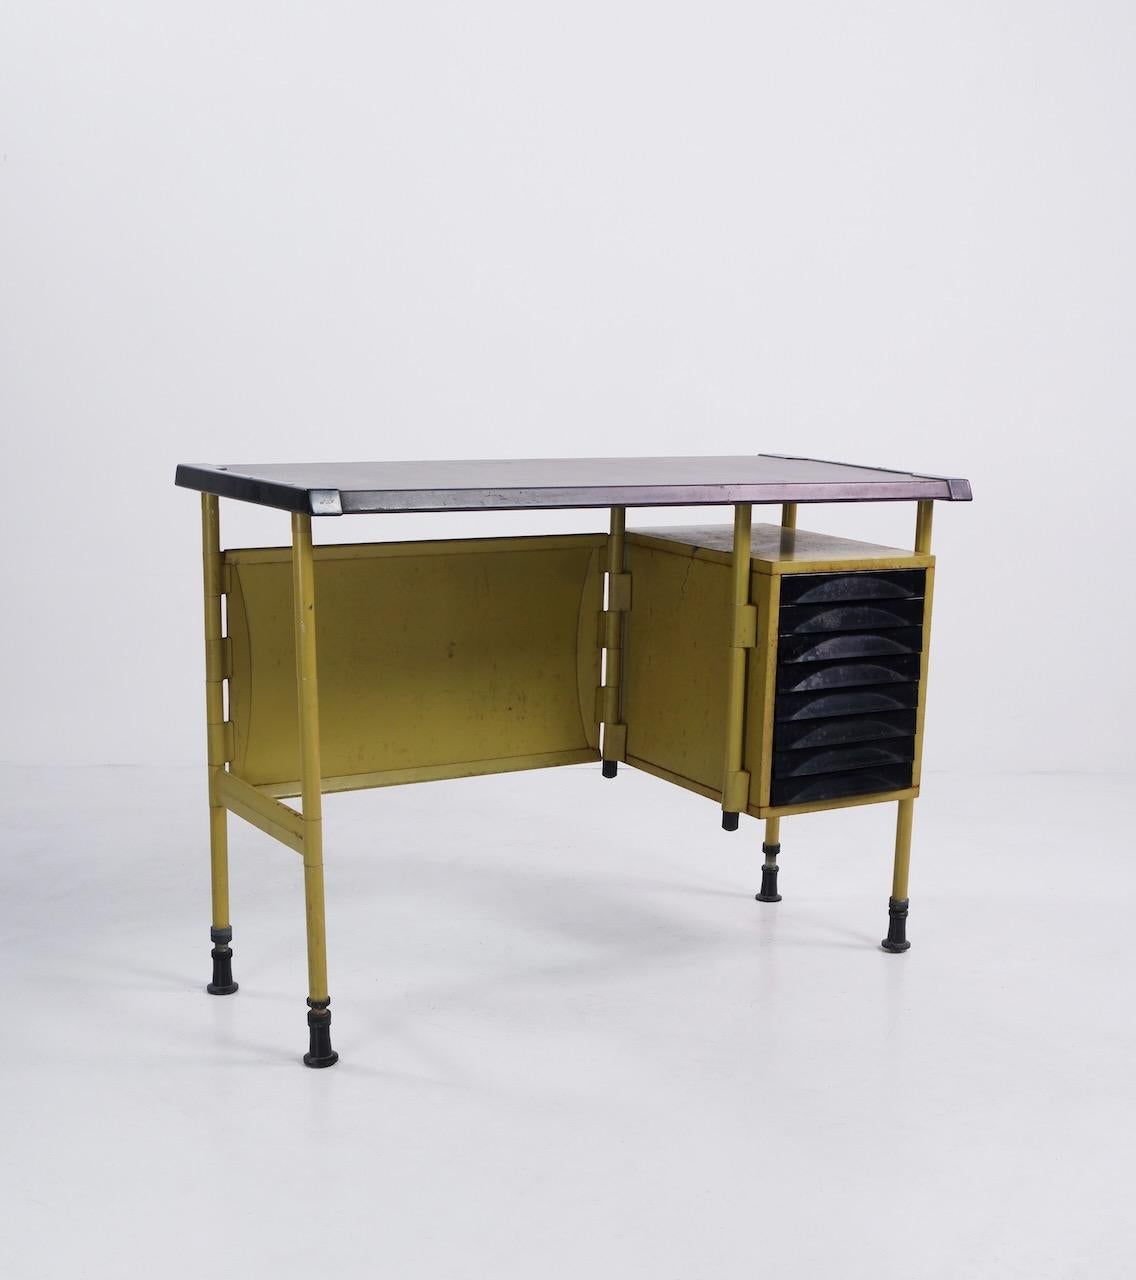 Small industrial desk / side desk, designed by BBPR architects and produced by Olivetti Synthesis in the 1960's.
  